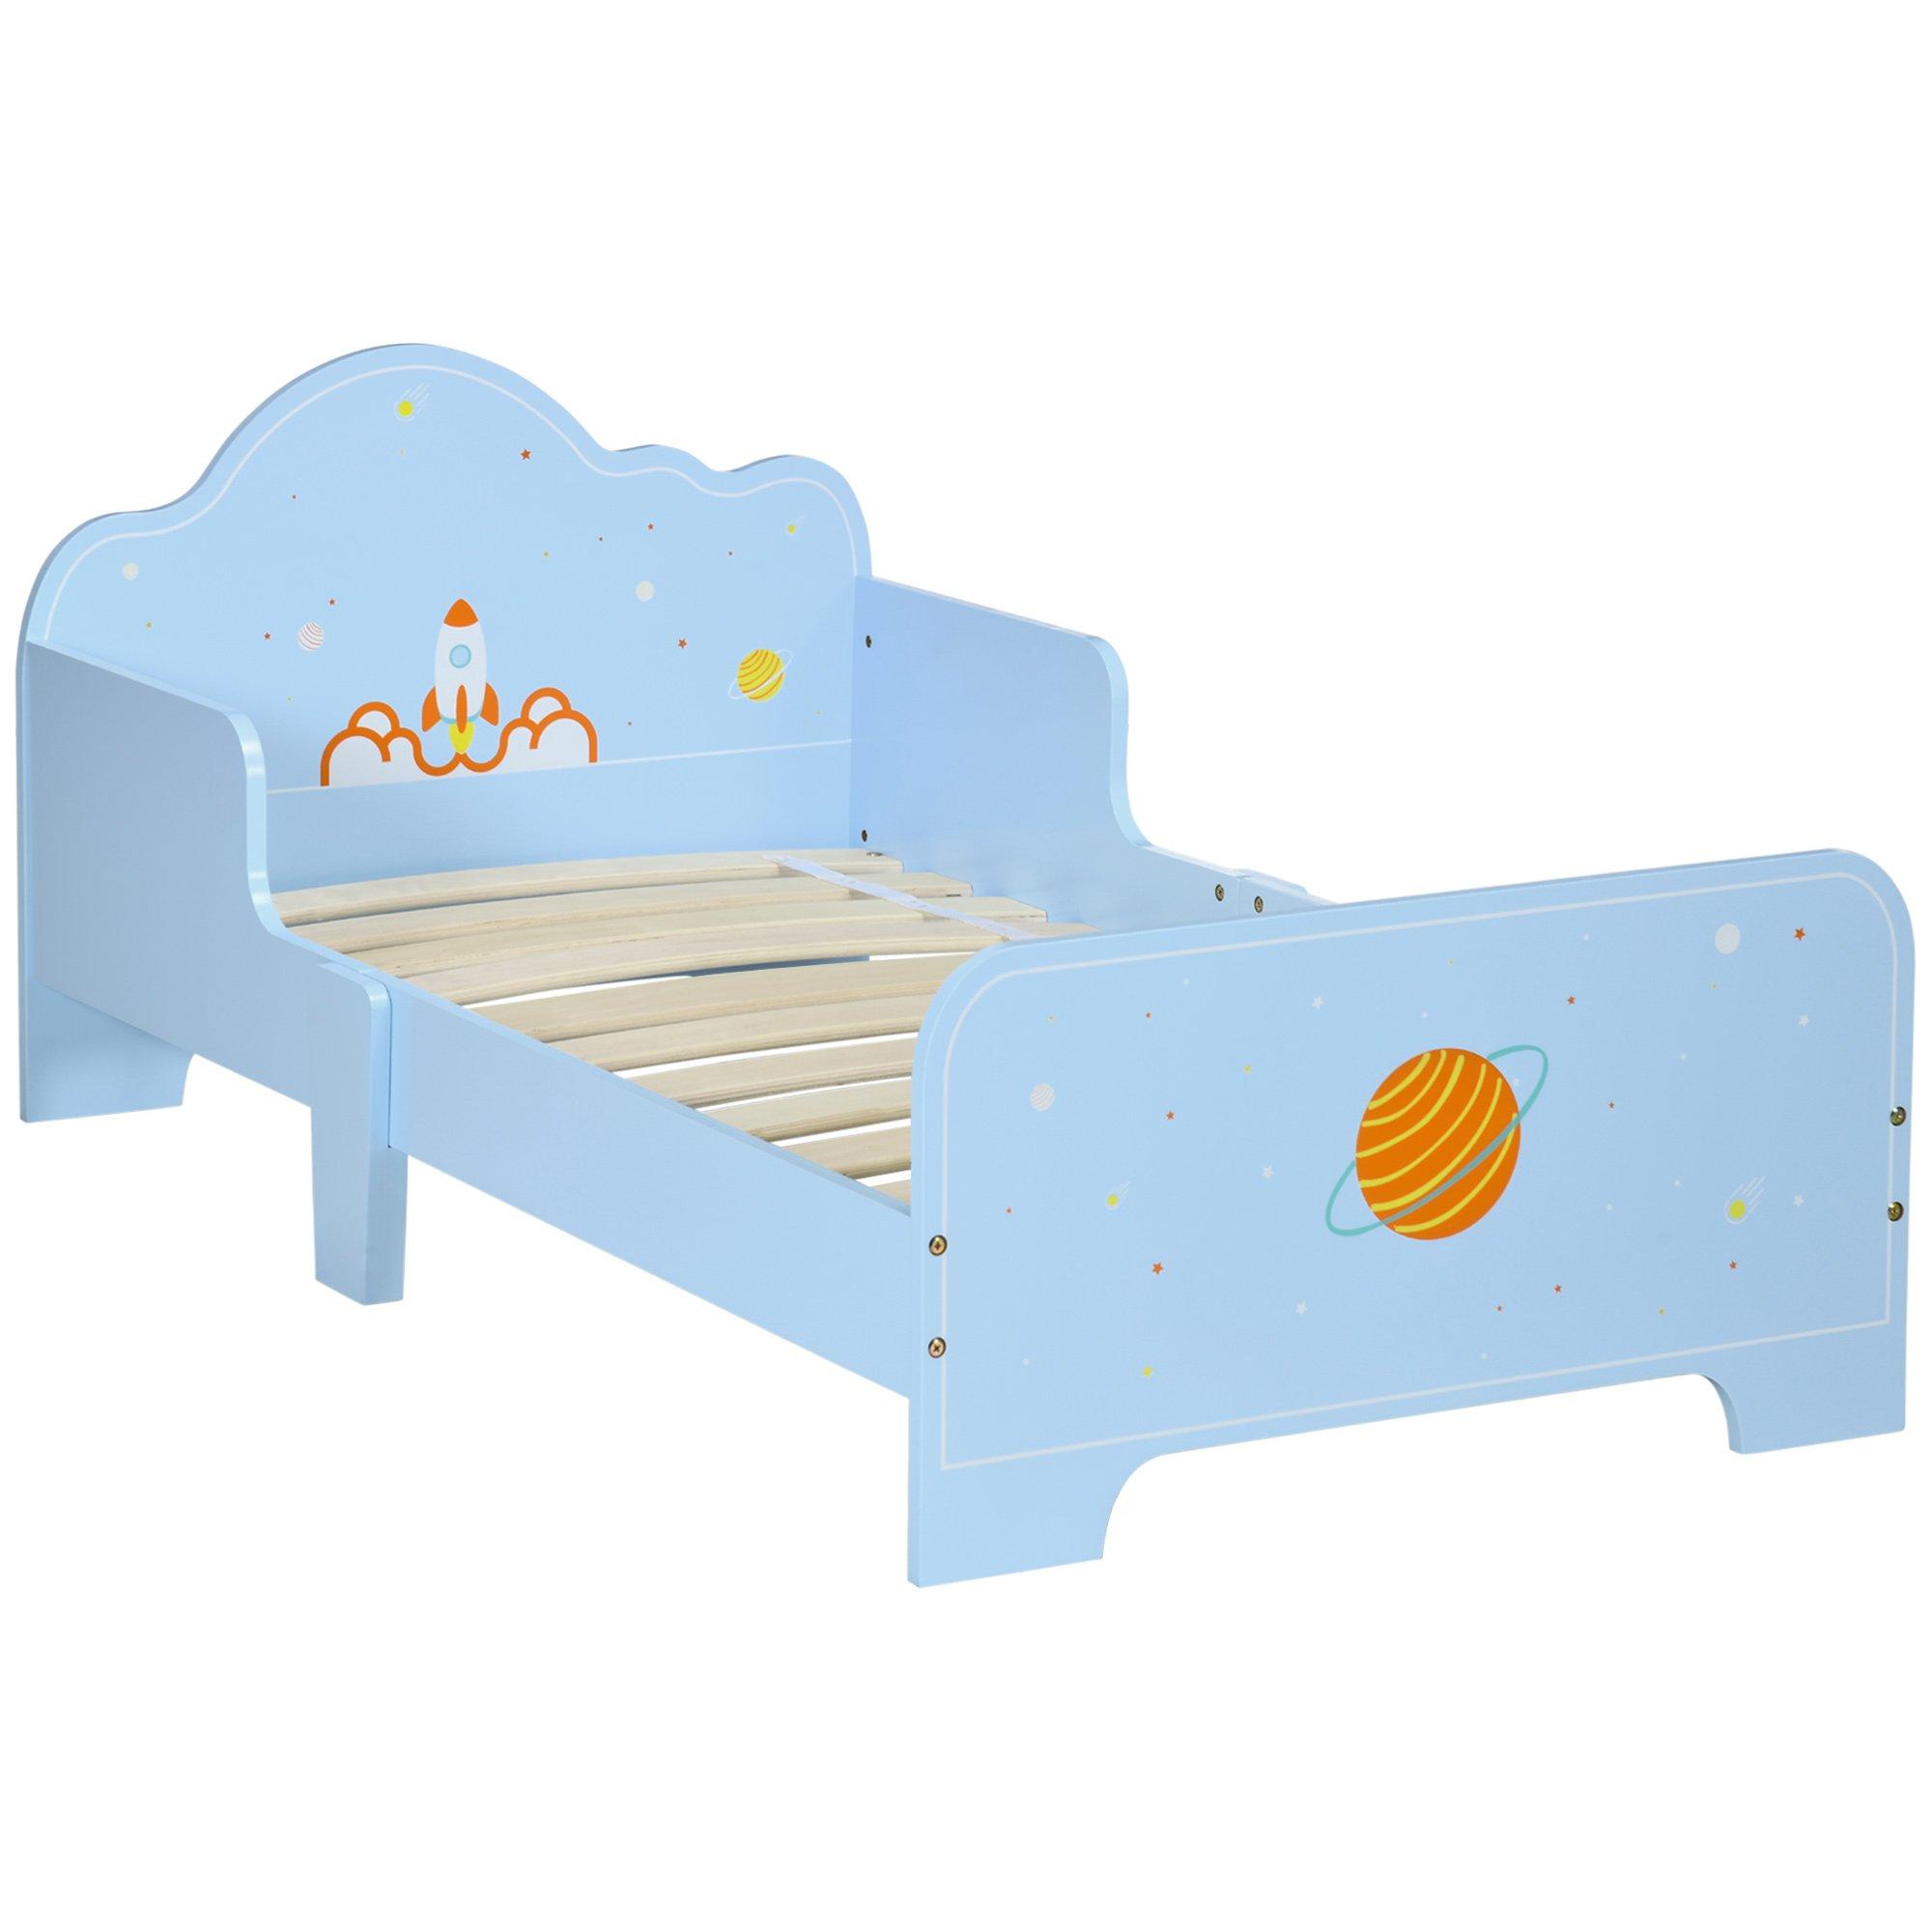 Kids Toddler Bed with Rocket and Planets Patterns, for Boys, Girls, Ages 3-6 Years